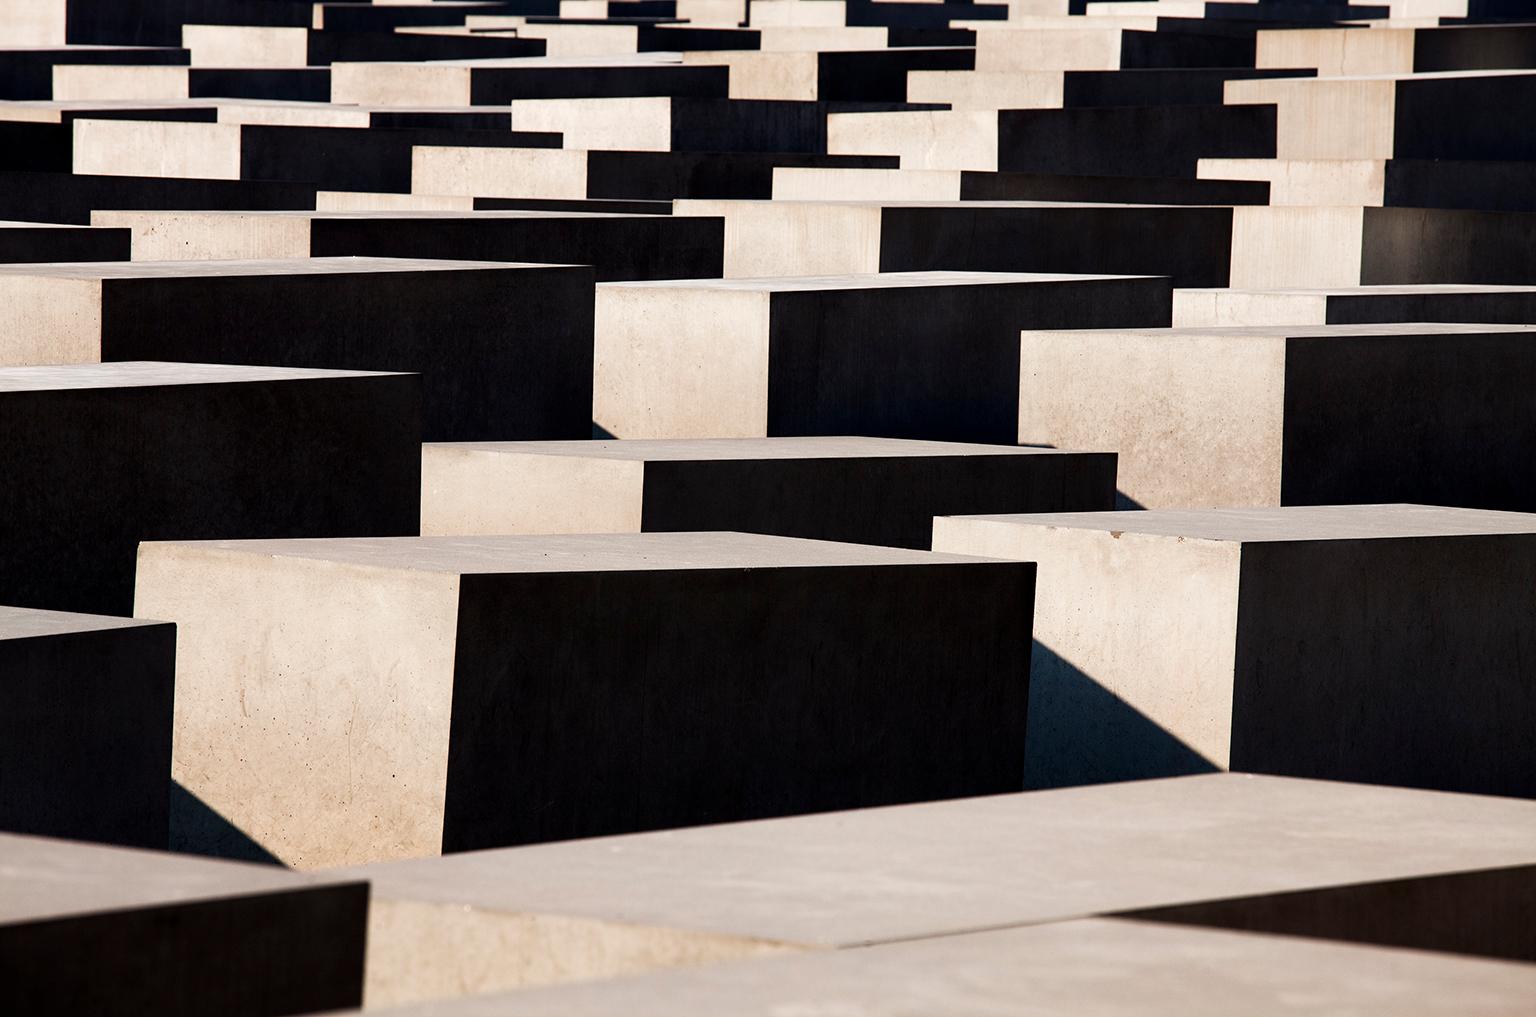  Cosmo Condina Color Photograph - " Memorial II, to the Murdered Jews of Europe", Berlin Germany.